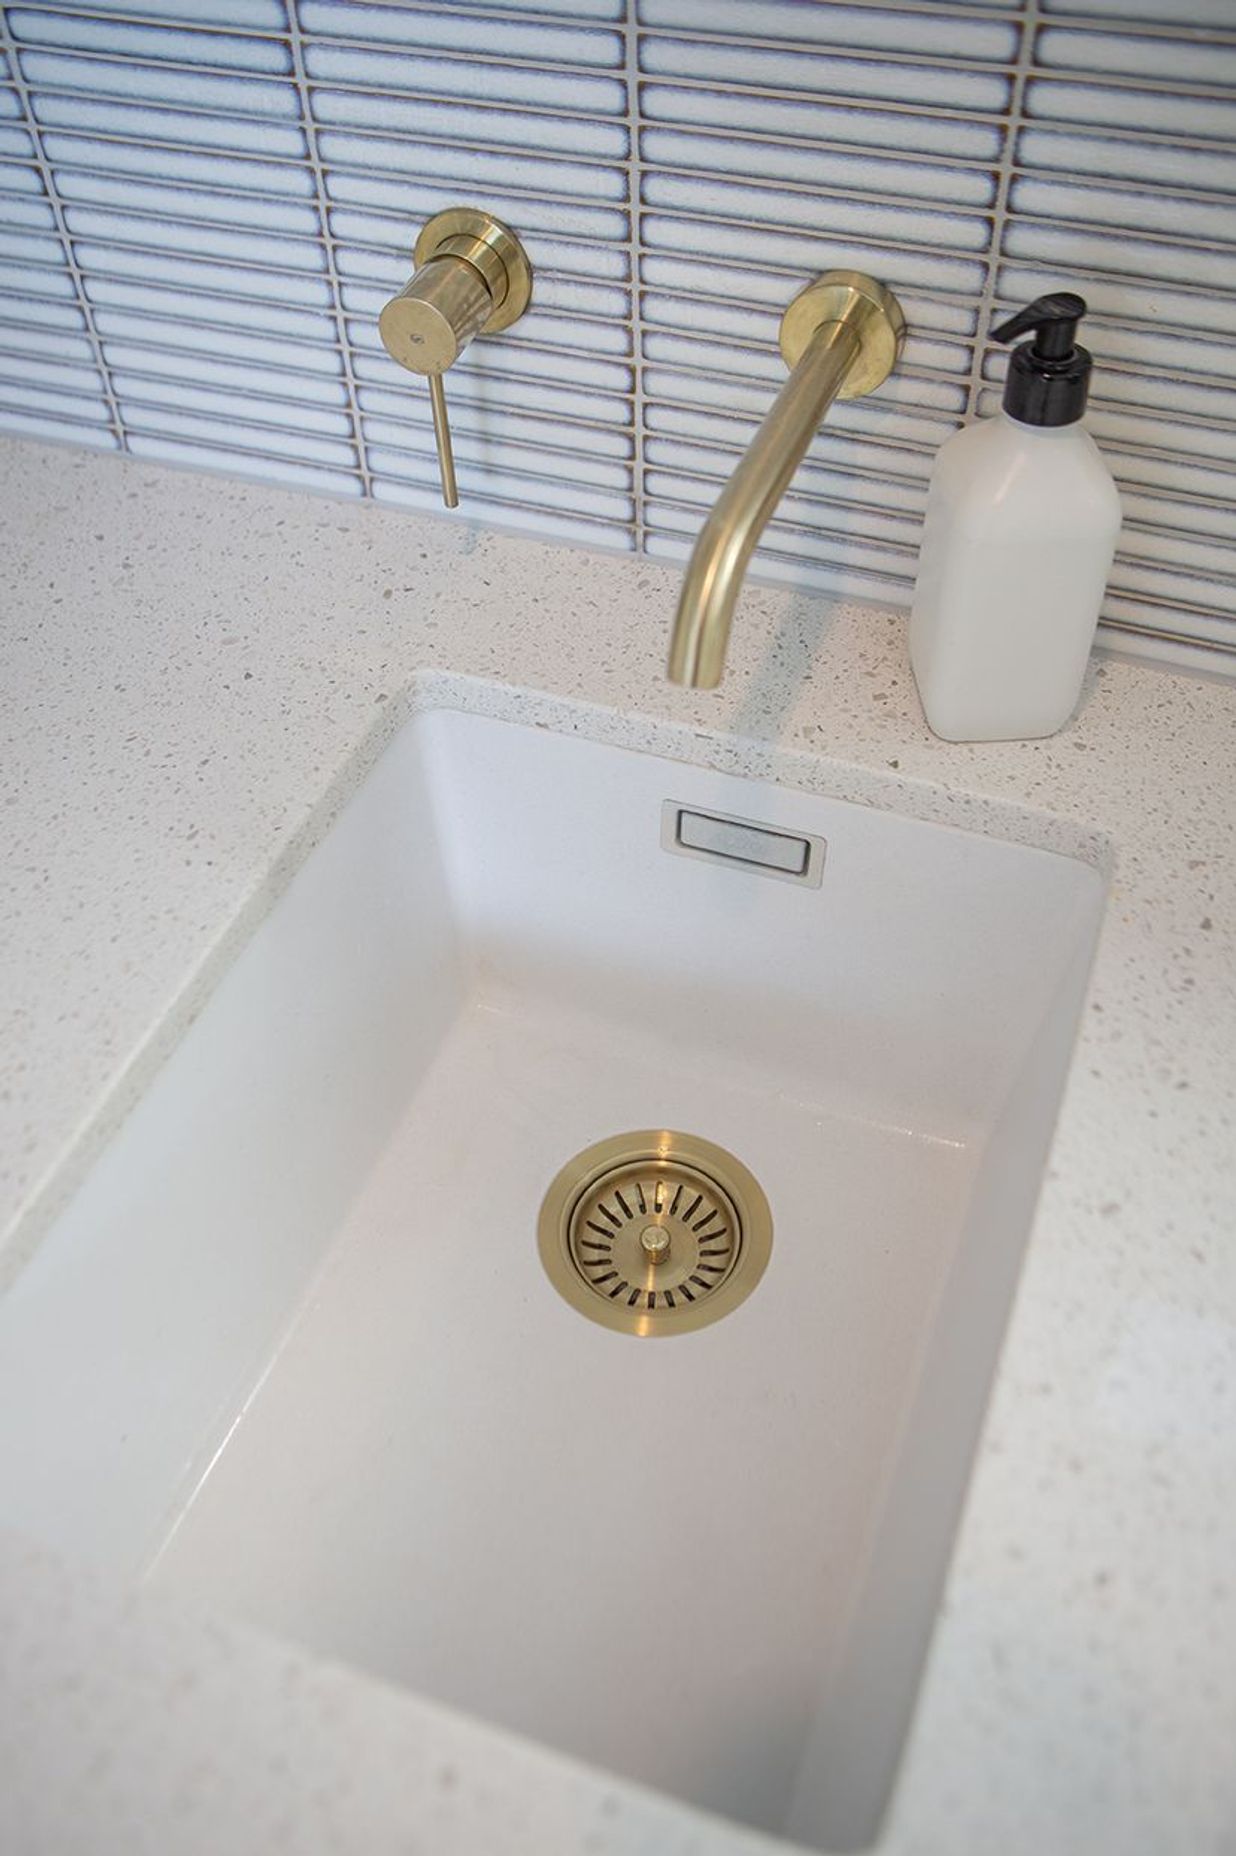 Brass fittings, including the waste. The Blanco Silgranite sink can also take a small bucket, or can be used for soaking.